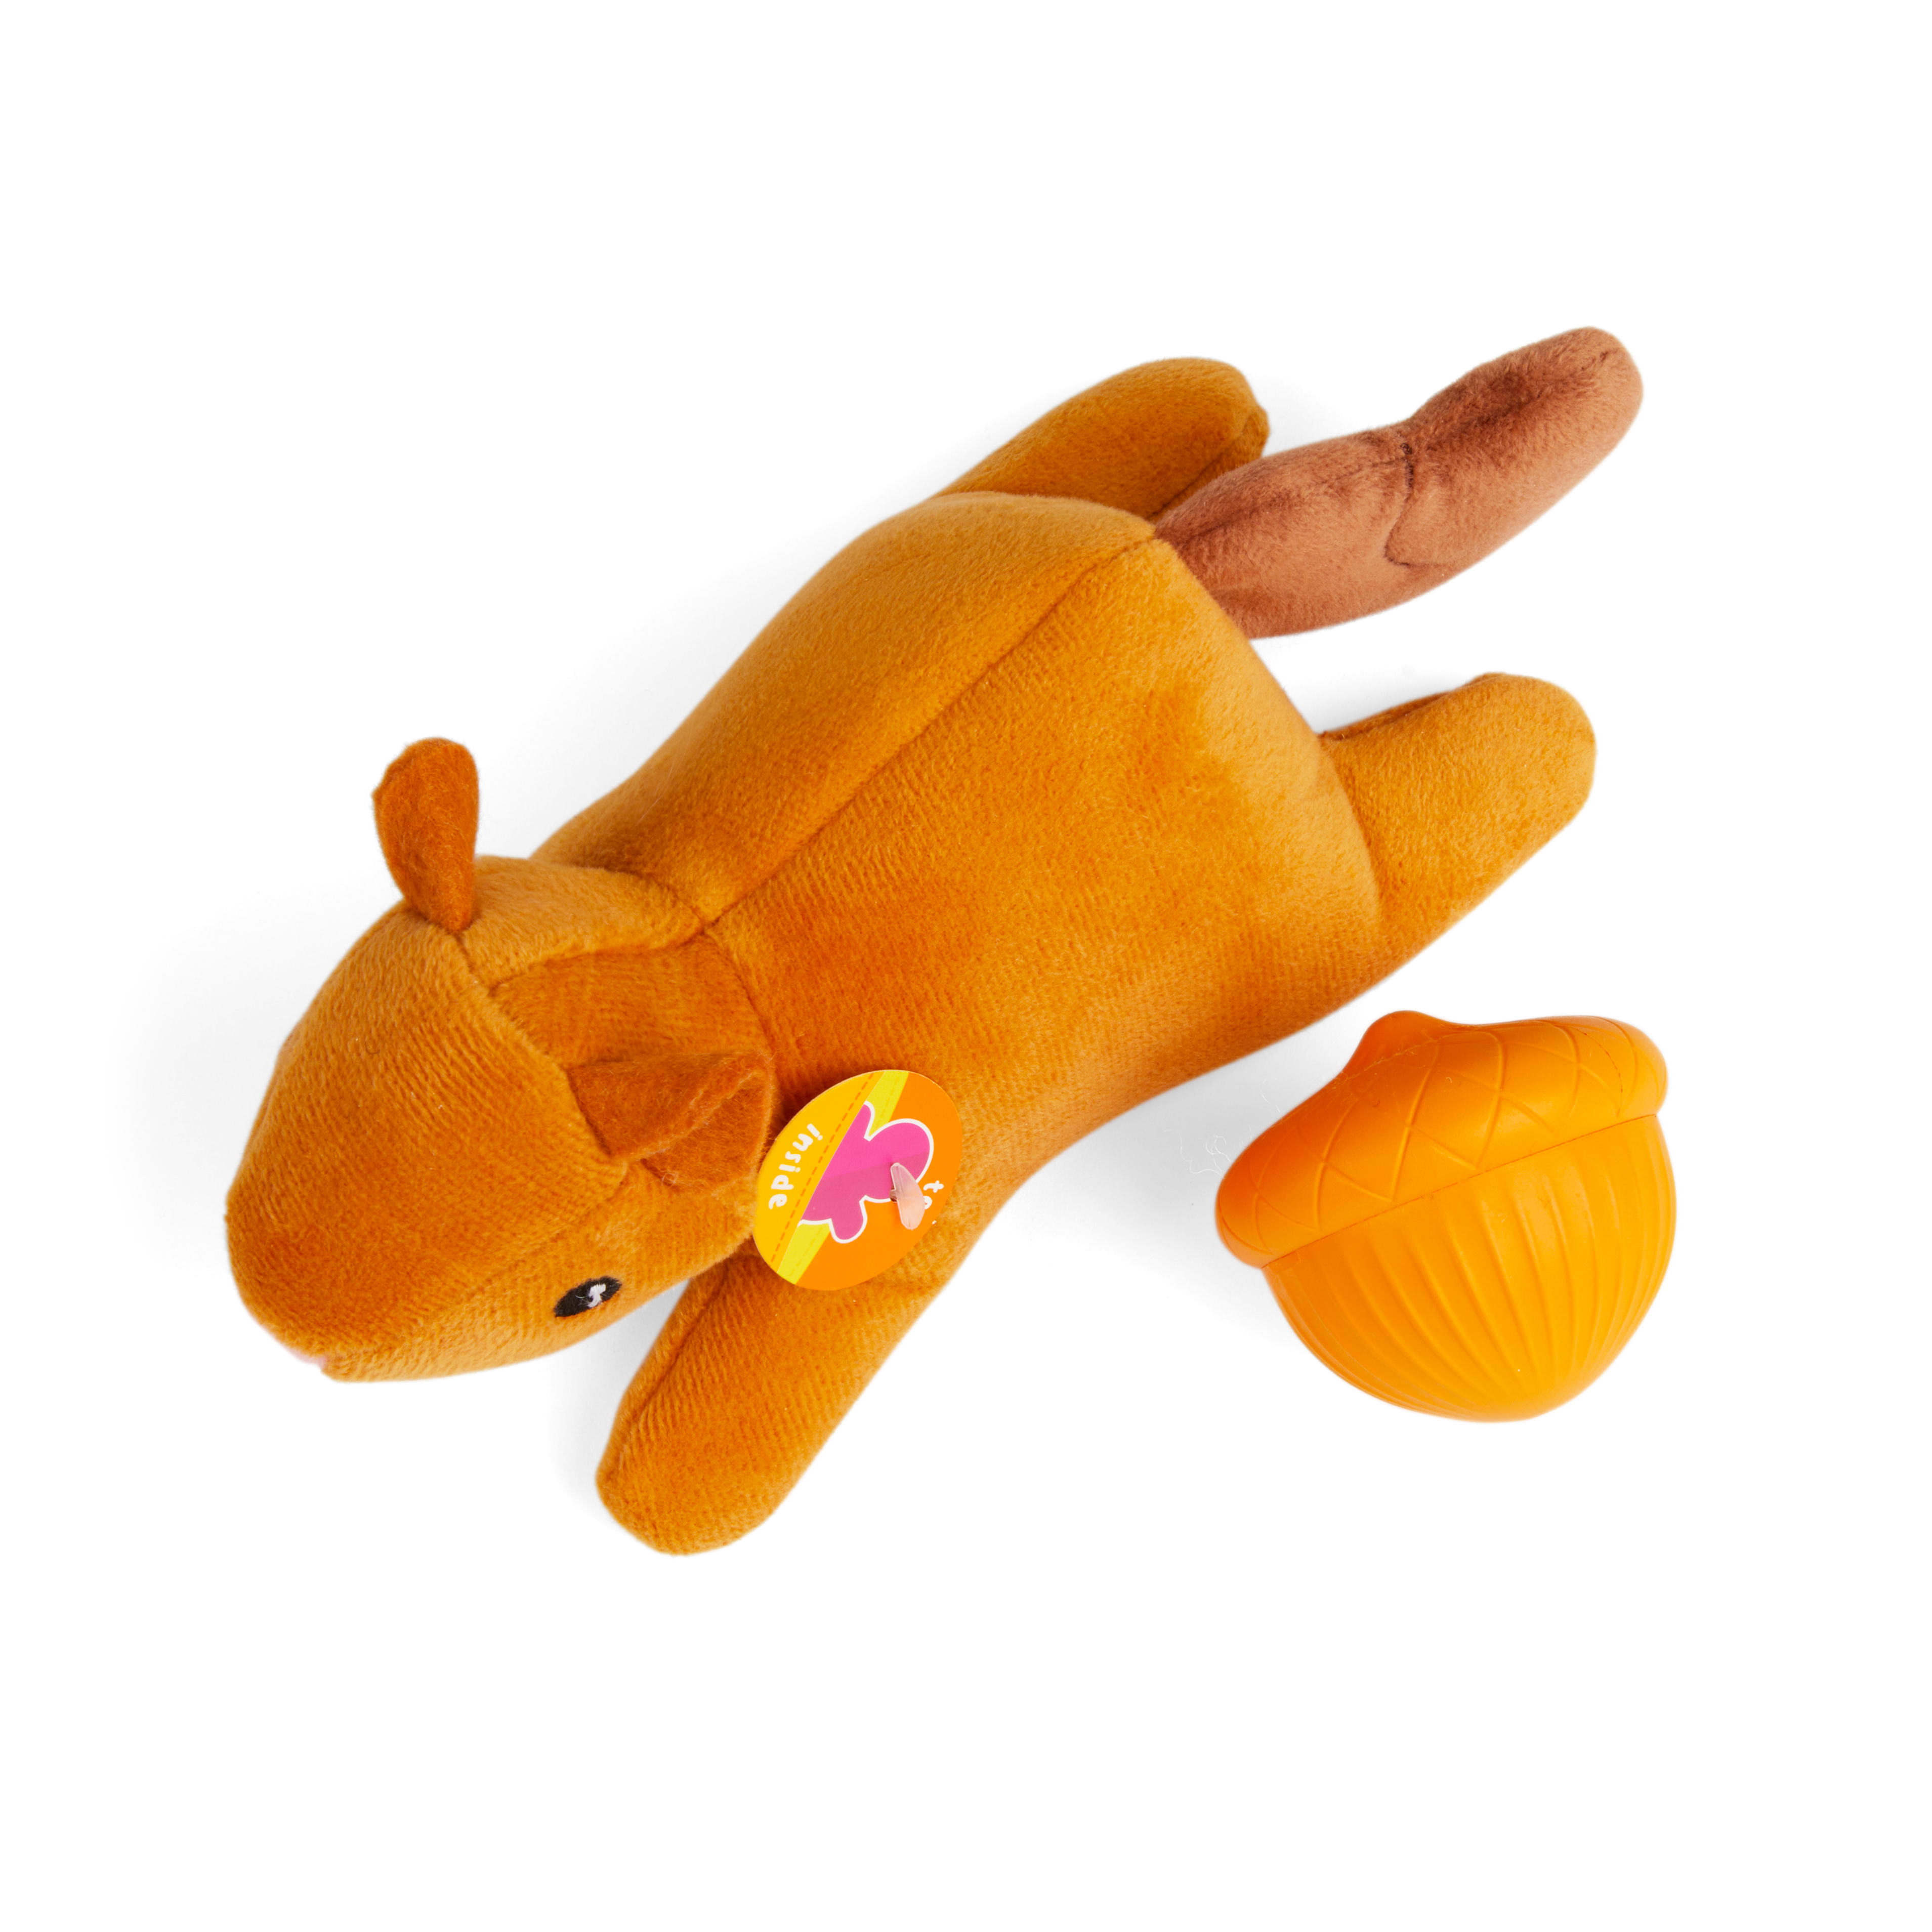 Bounds Blind Plush Squirrel Dog Toy Petco